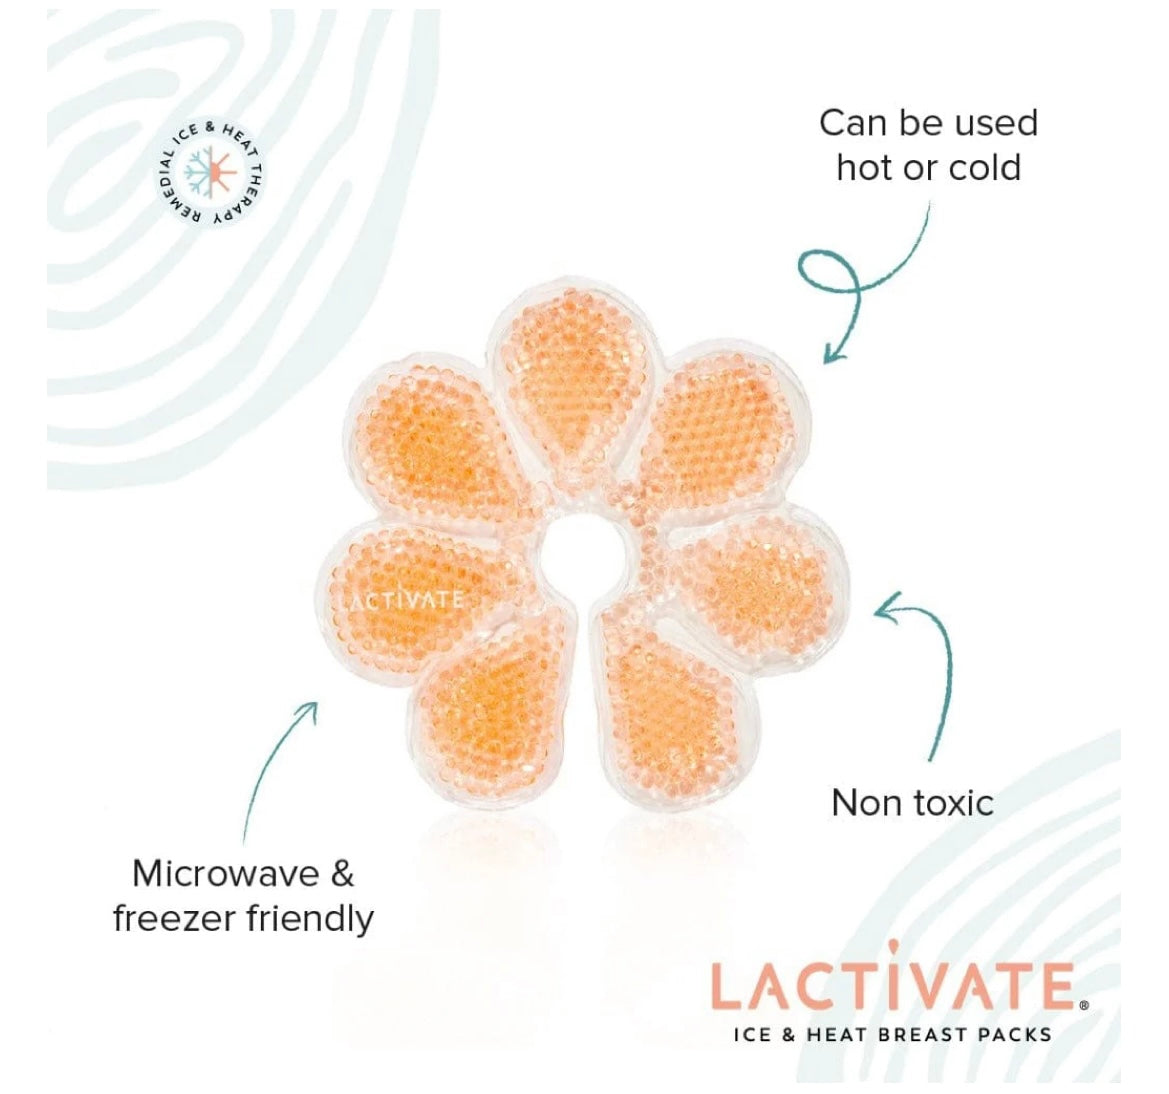 LACTIVATE REMEDIAL ICE & HEAT BREAST PACKS